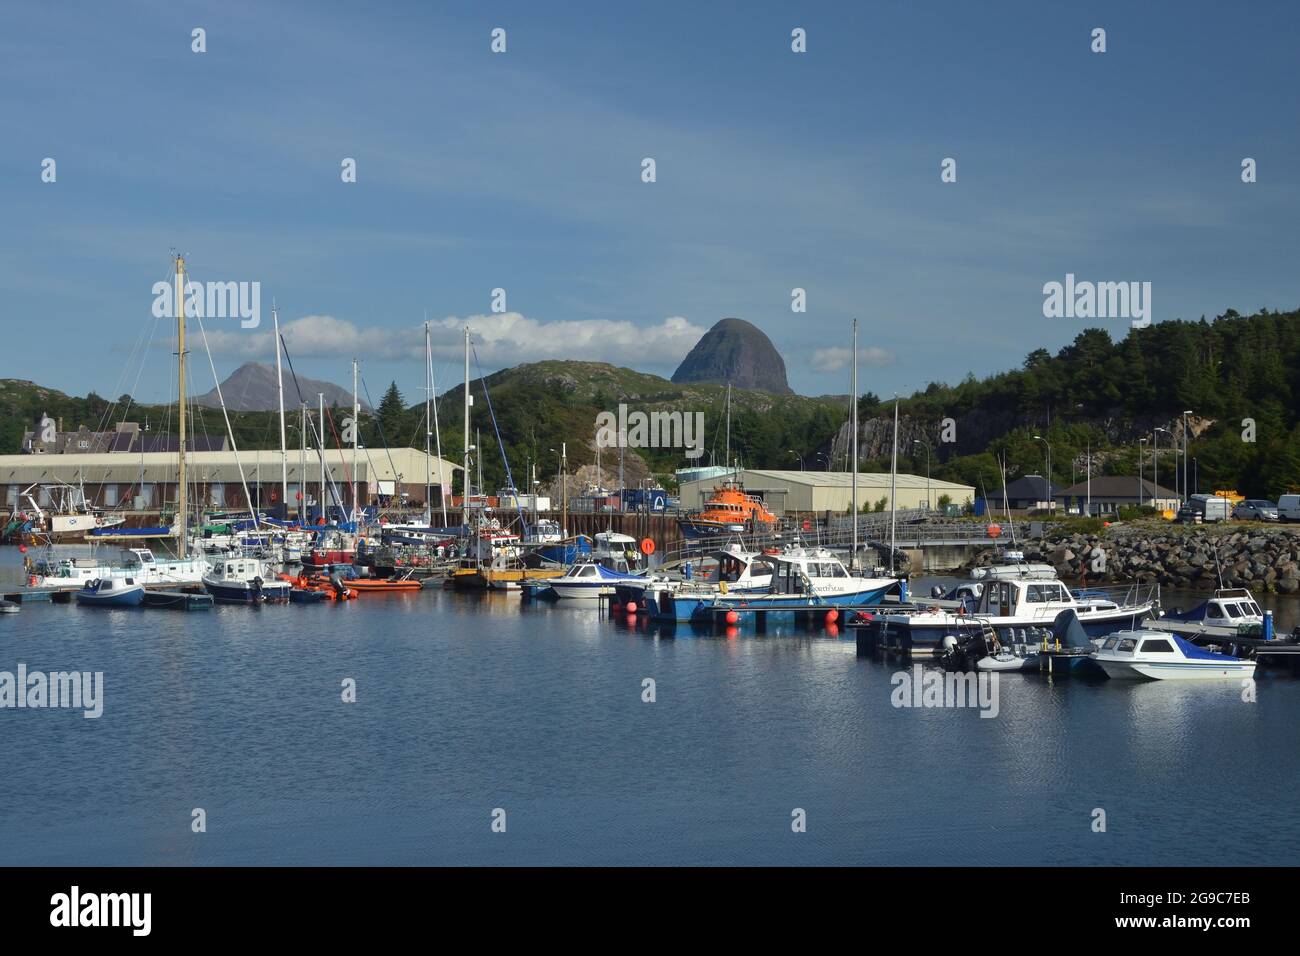 The marina at Lochinver Harbour, with the mountain Suilven visible in the background. At Lochinver, Scottish Highlands, UK. Stock Photo